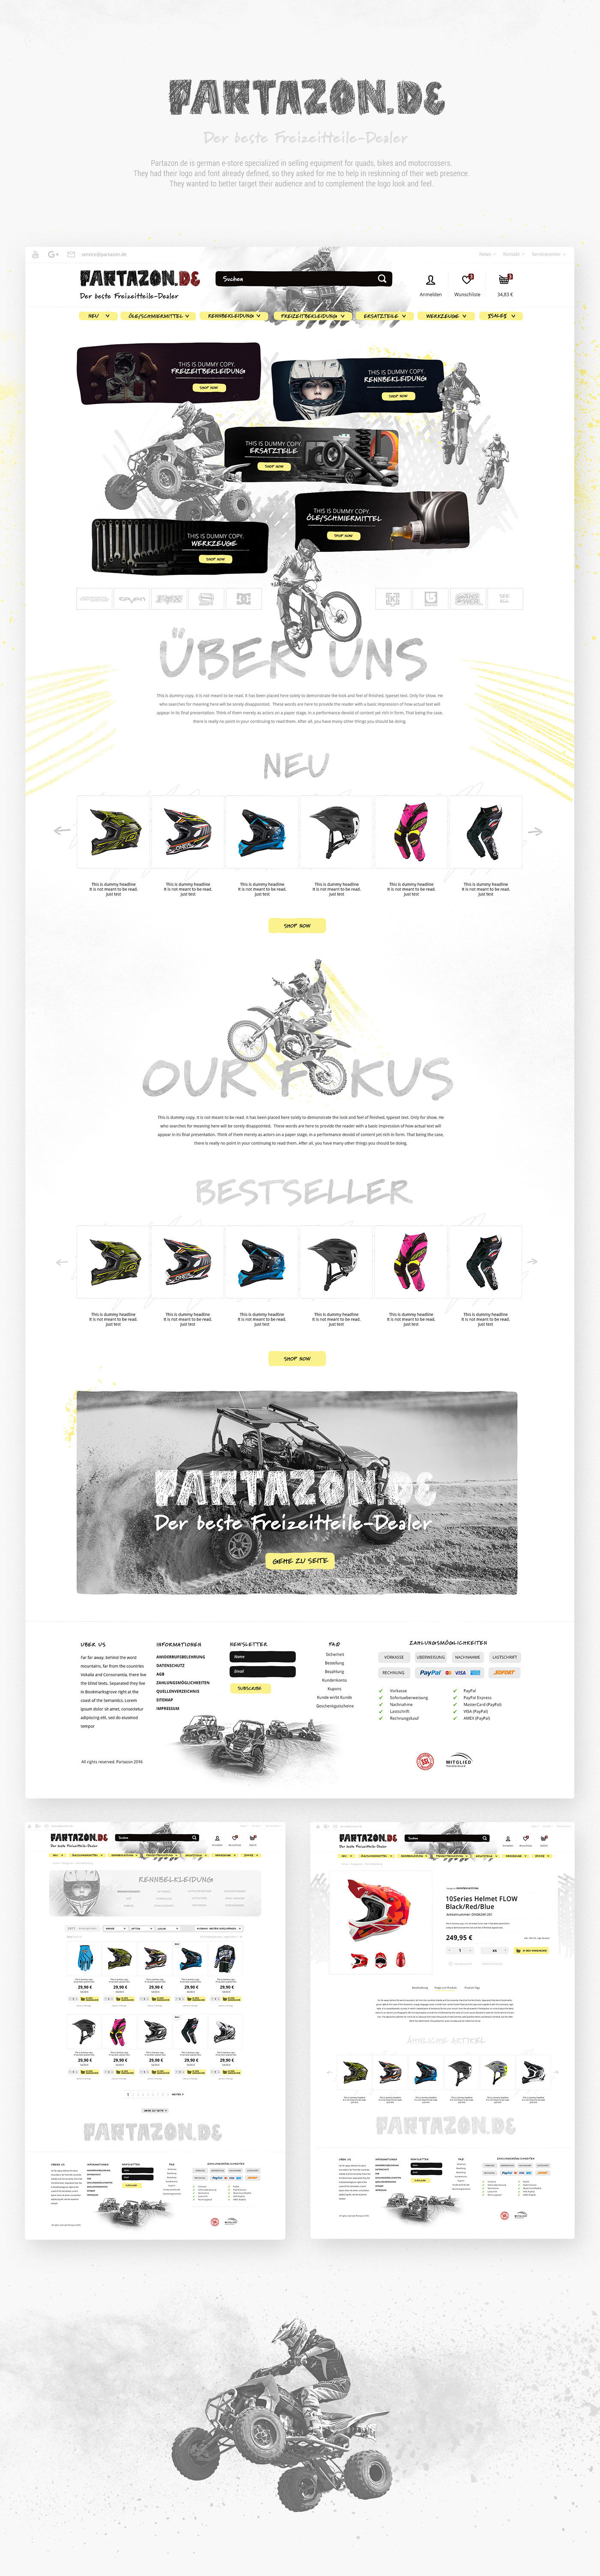 store e-commerce extreme sports dirty Motocross